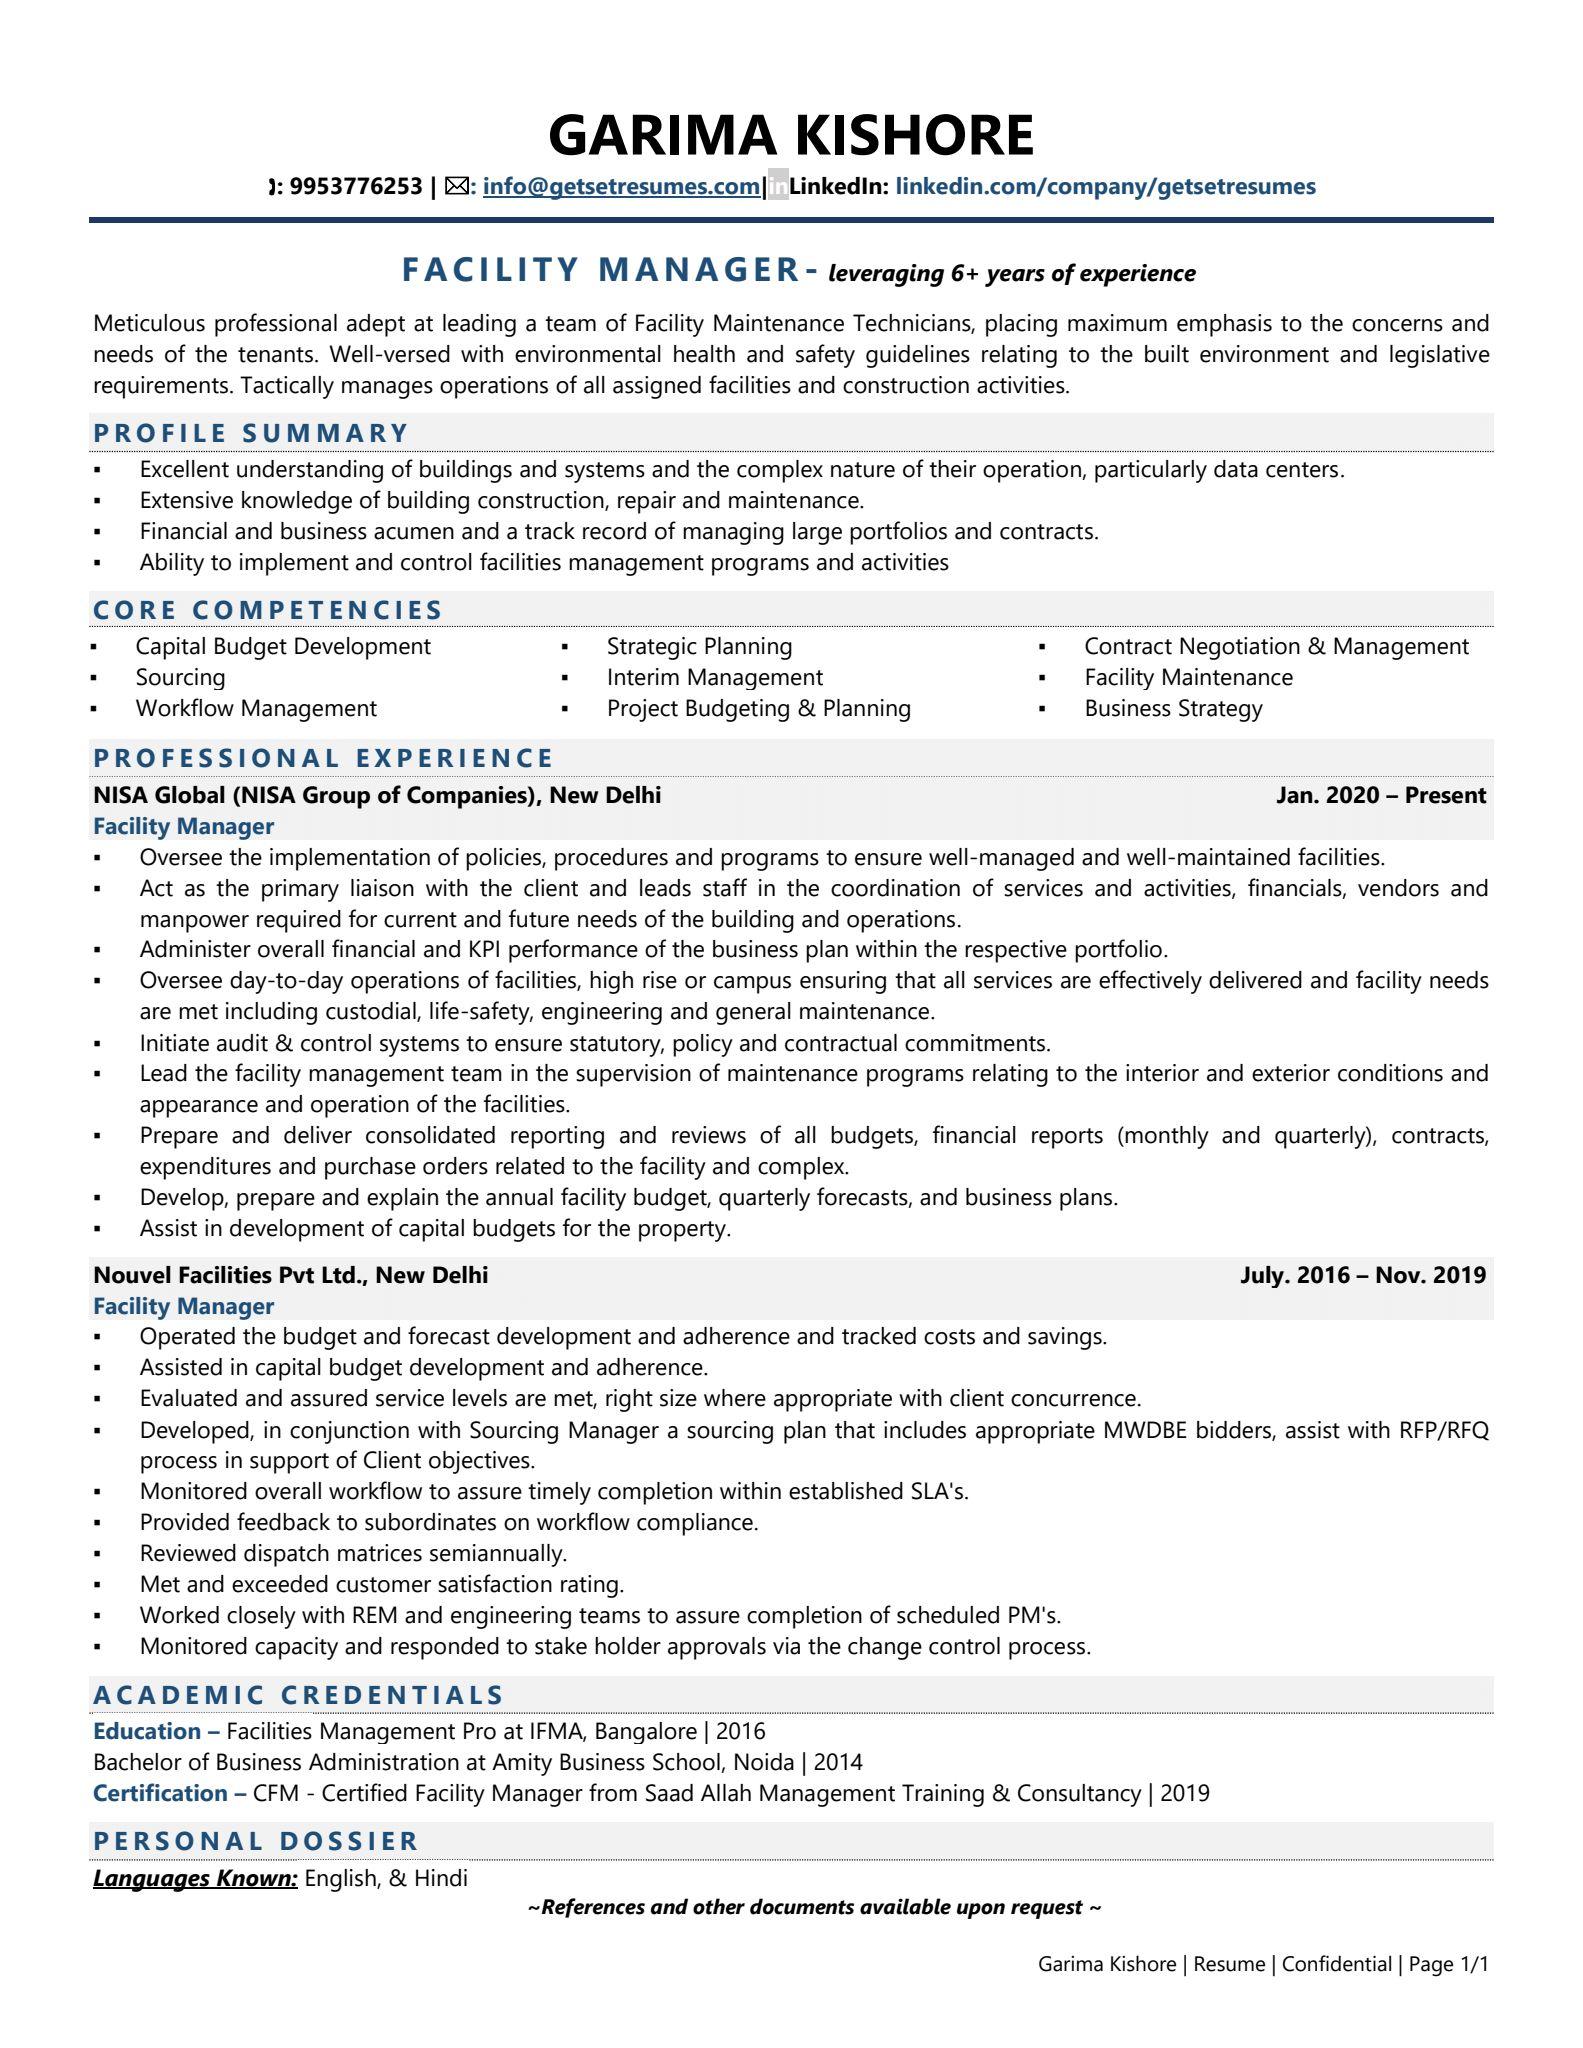 resume objective example facility manager